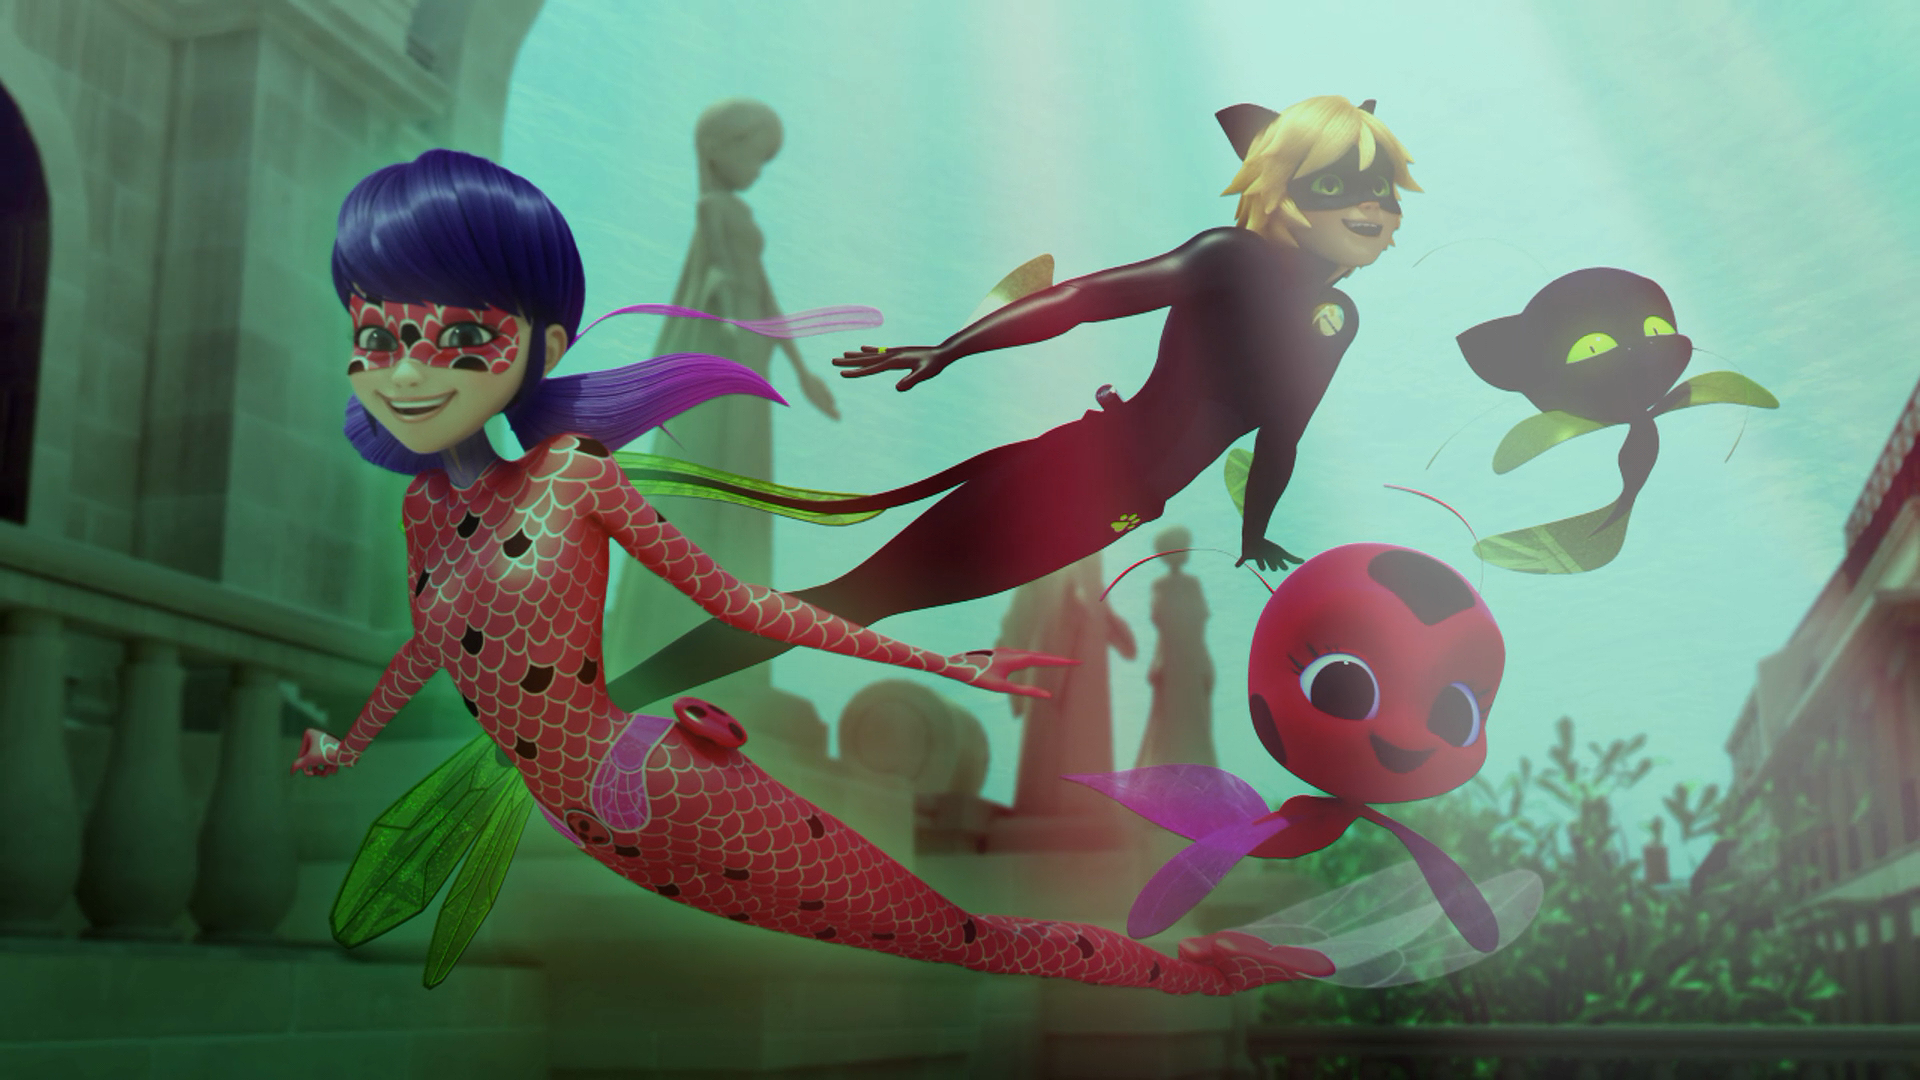 This wiki is about Miraculous: Tales of Ladybug & Cat Noir, the CGI sup...